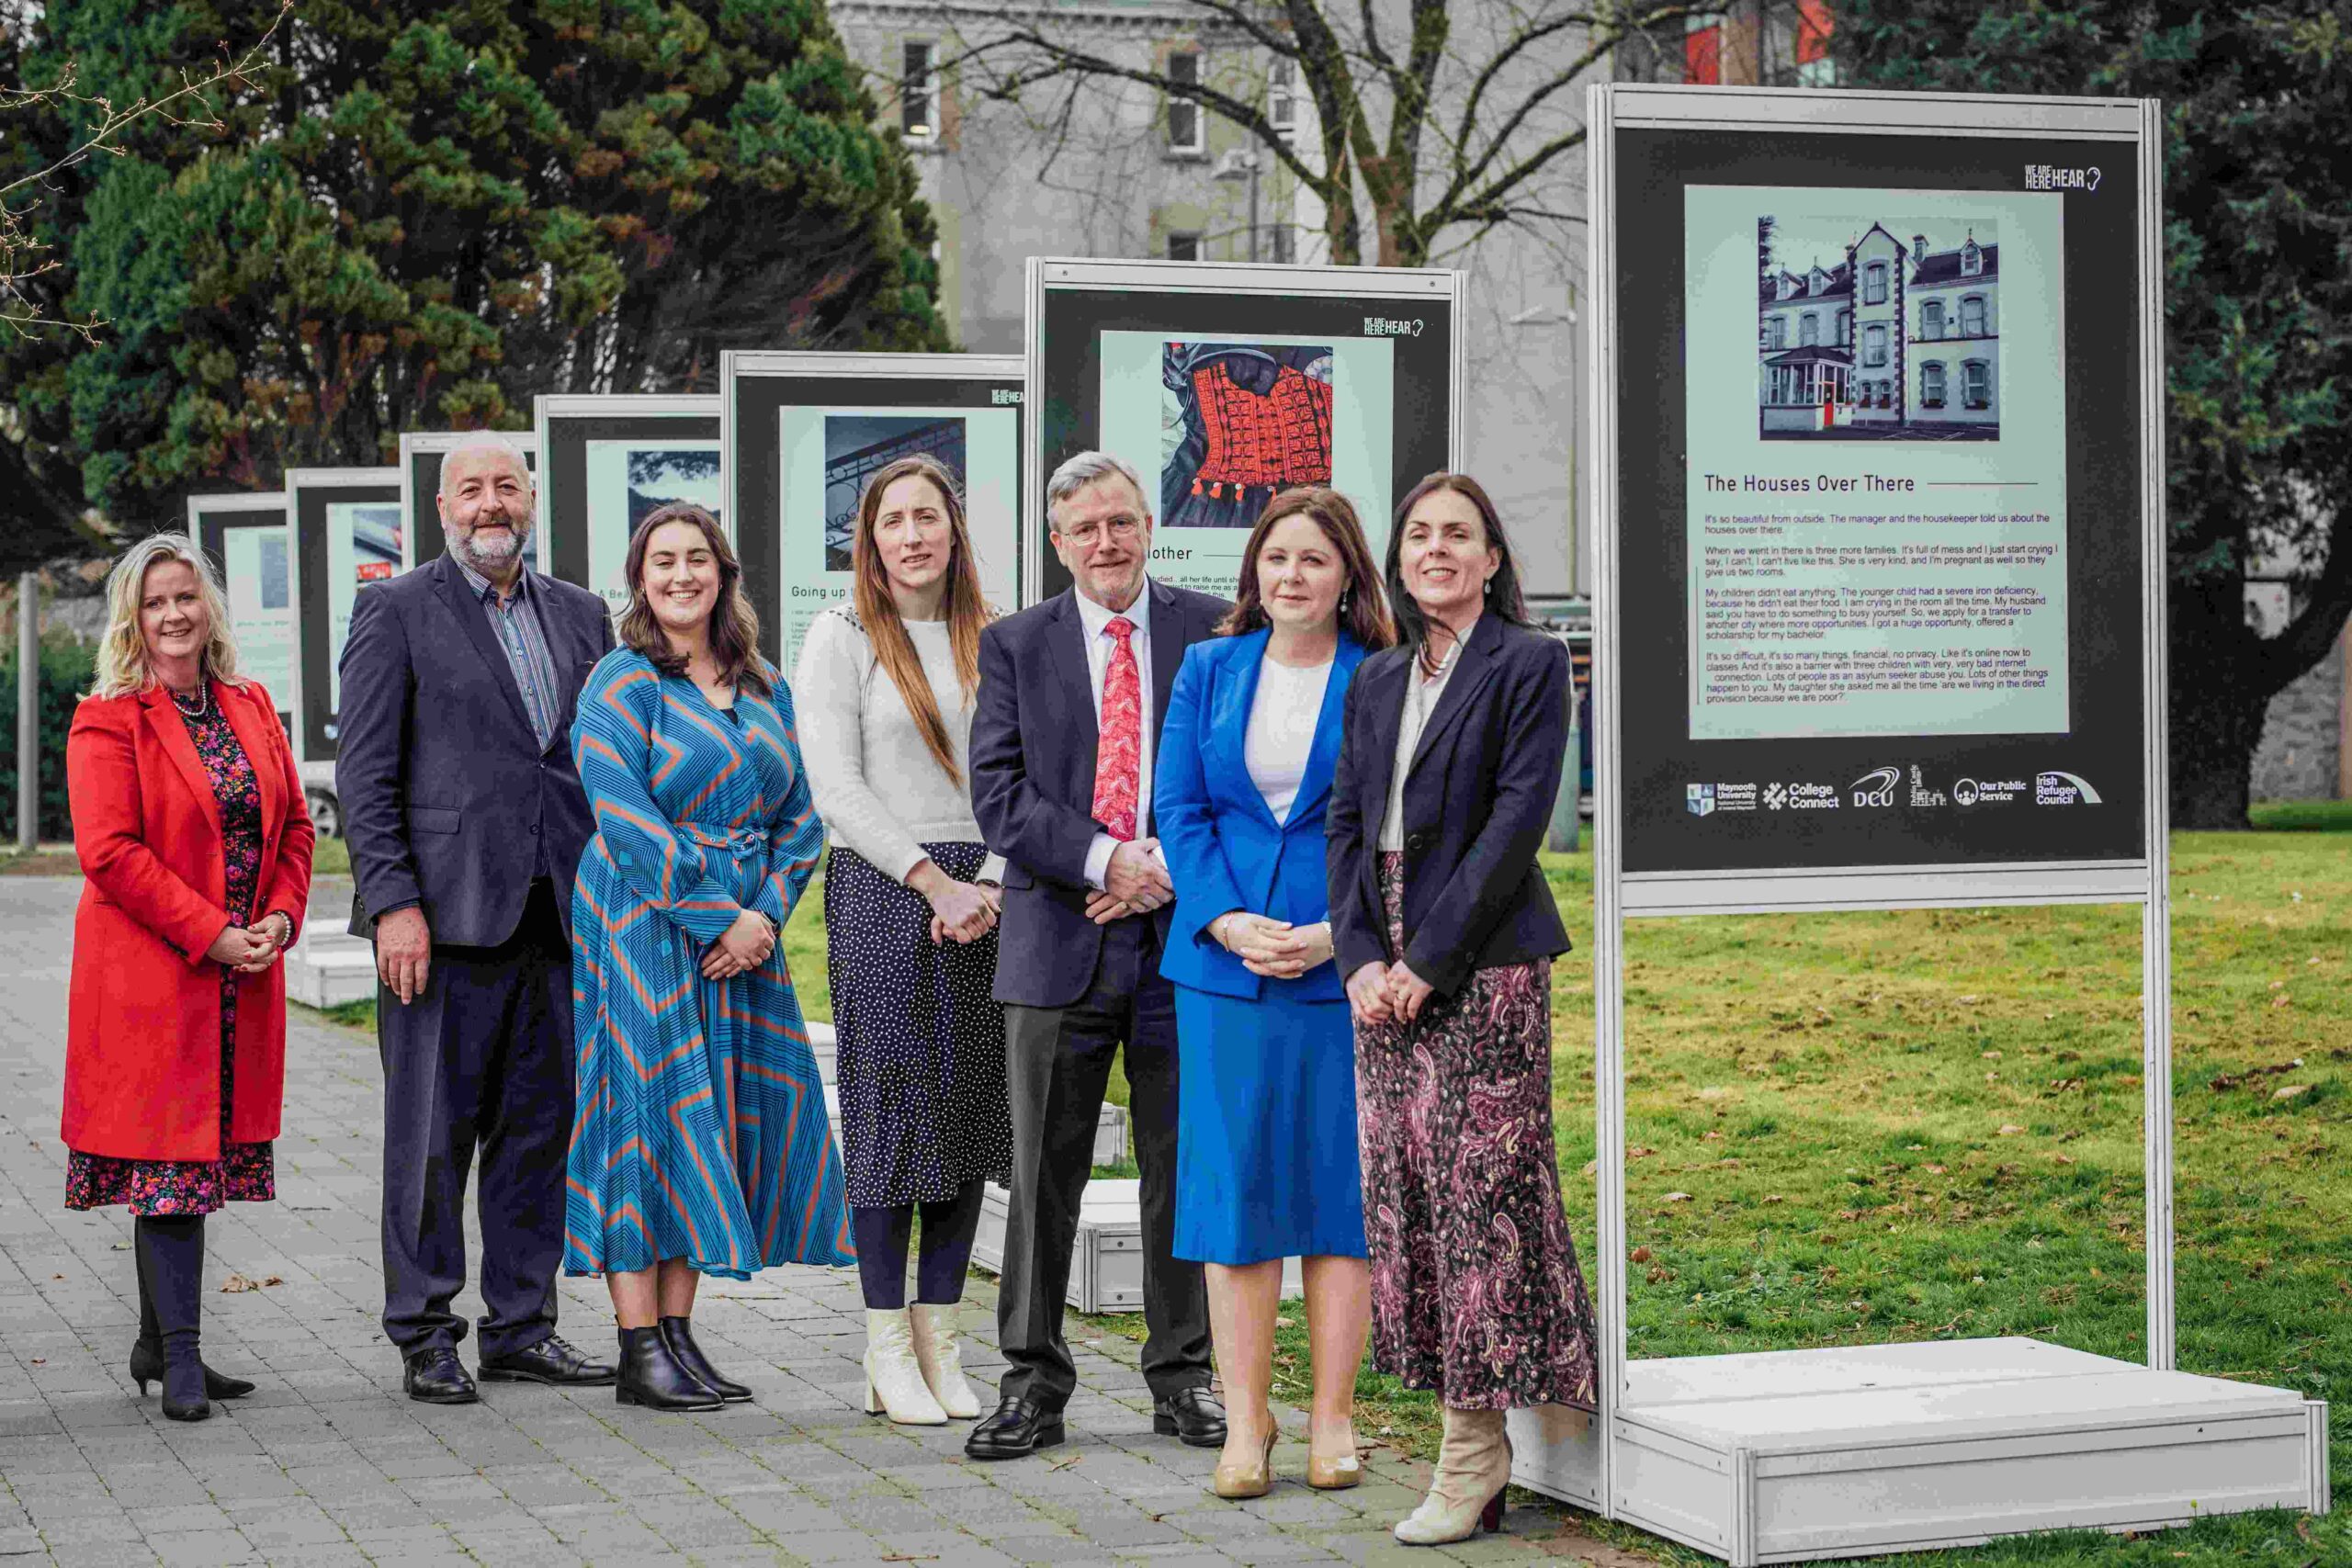 We Are Here HEAR Open Air Photography Expo - Professor Lorraine McIlrath, Director of EDII at MIC; Professor Michael Healy, Vice-President of Research at MIC; Róisín Burke, MISU President; Edel Foster, Equality, Diversity & Inclusion Manager (MIC); Professor Eugene Wall, President of MIC; Professor Niamh Hourigan, Vice-President of Academic-Affairs at MIC; Dr Sarah Sartori, We Are Here, HEAR Project Lead.